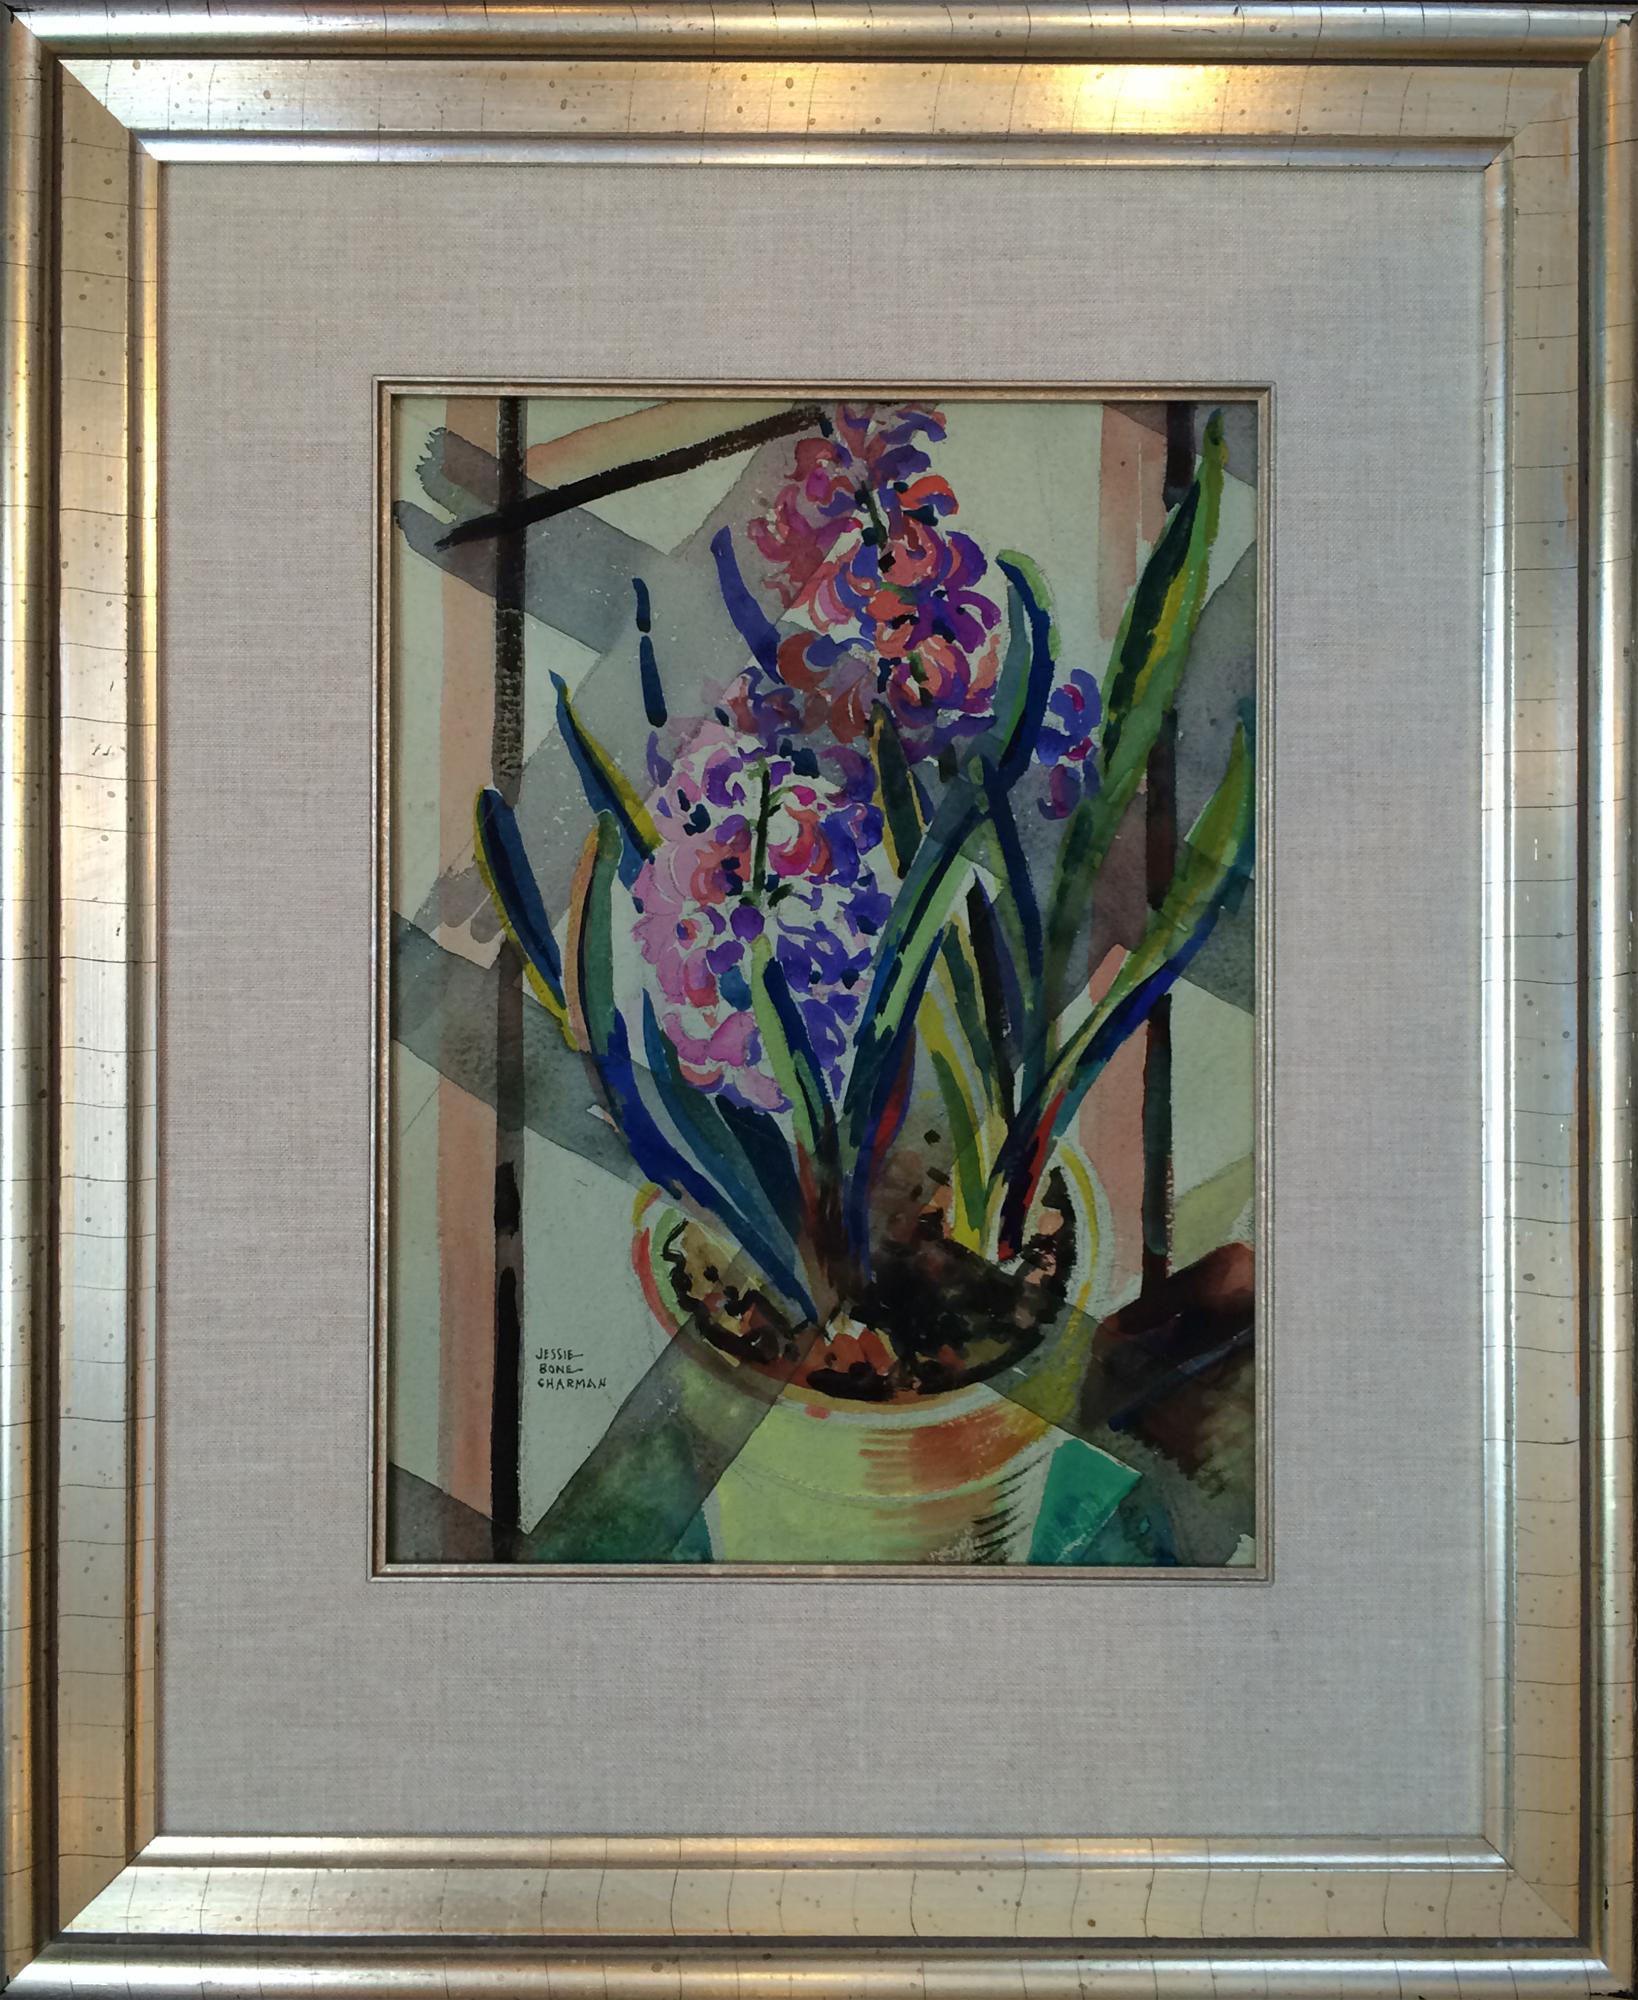 American artist Jessie Bone Charman (1895-1986) was known for her expressive still-life paintings, landscapes and marine scenes, as well as her abstract watercolors. 

The framed dimensions of this piece are 23" x 19" x 1.75", and the unframed